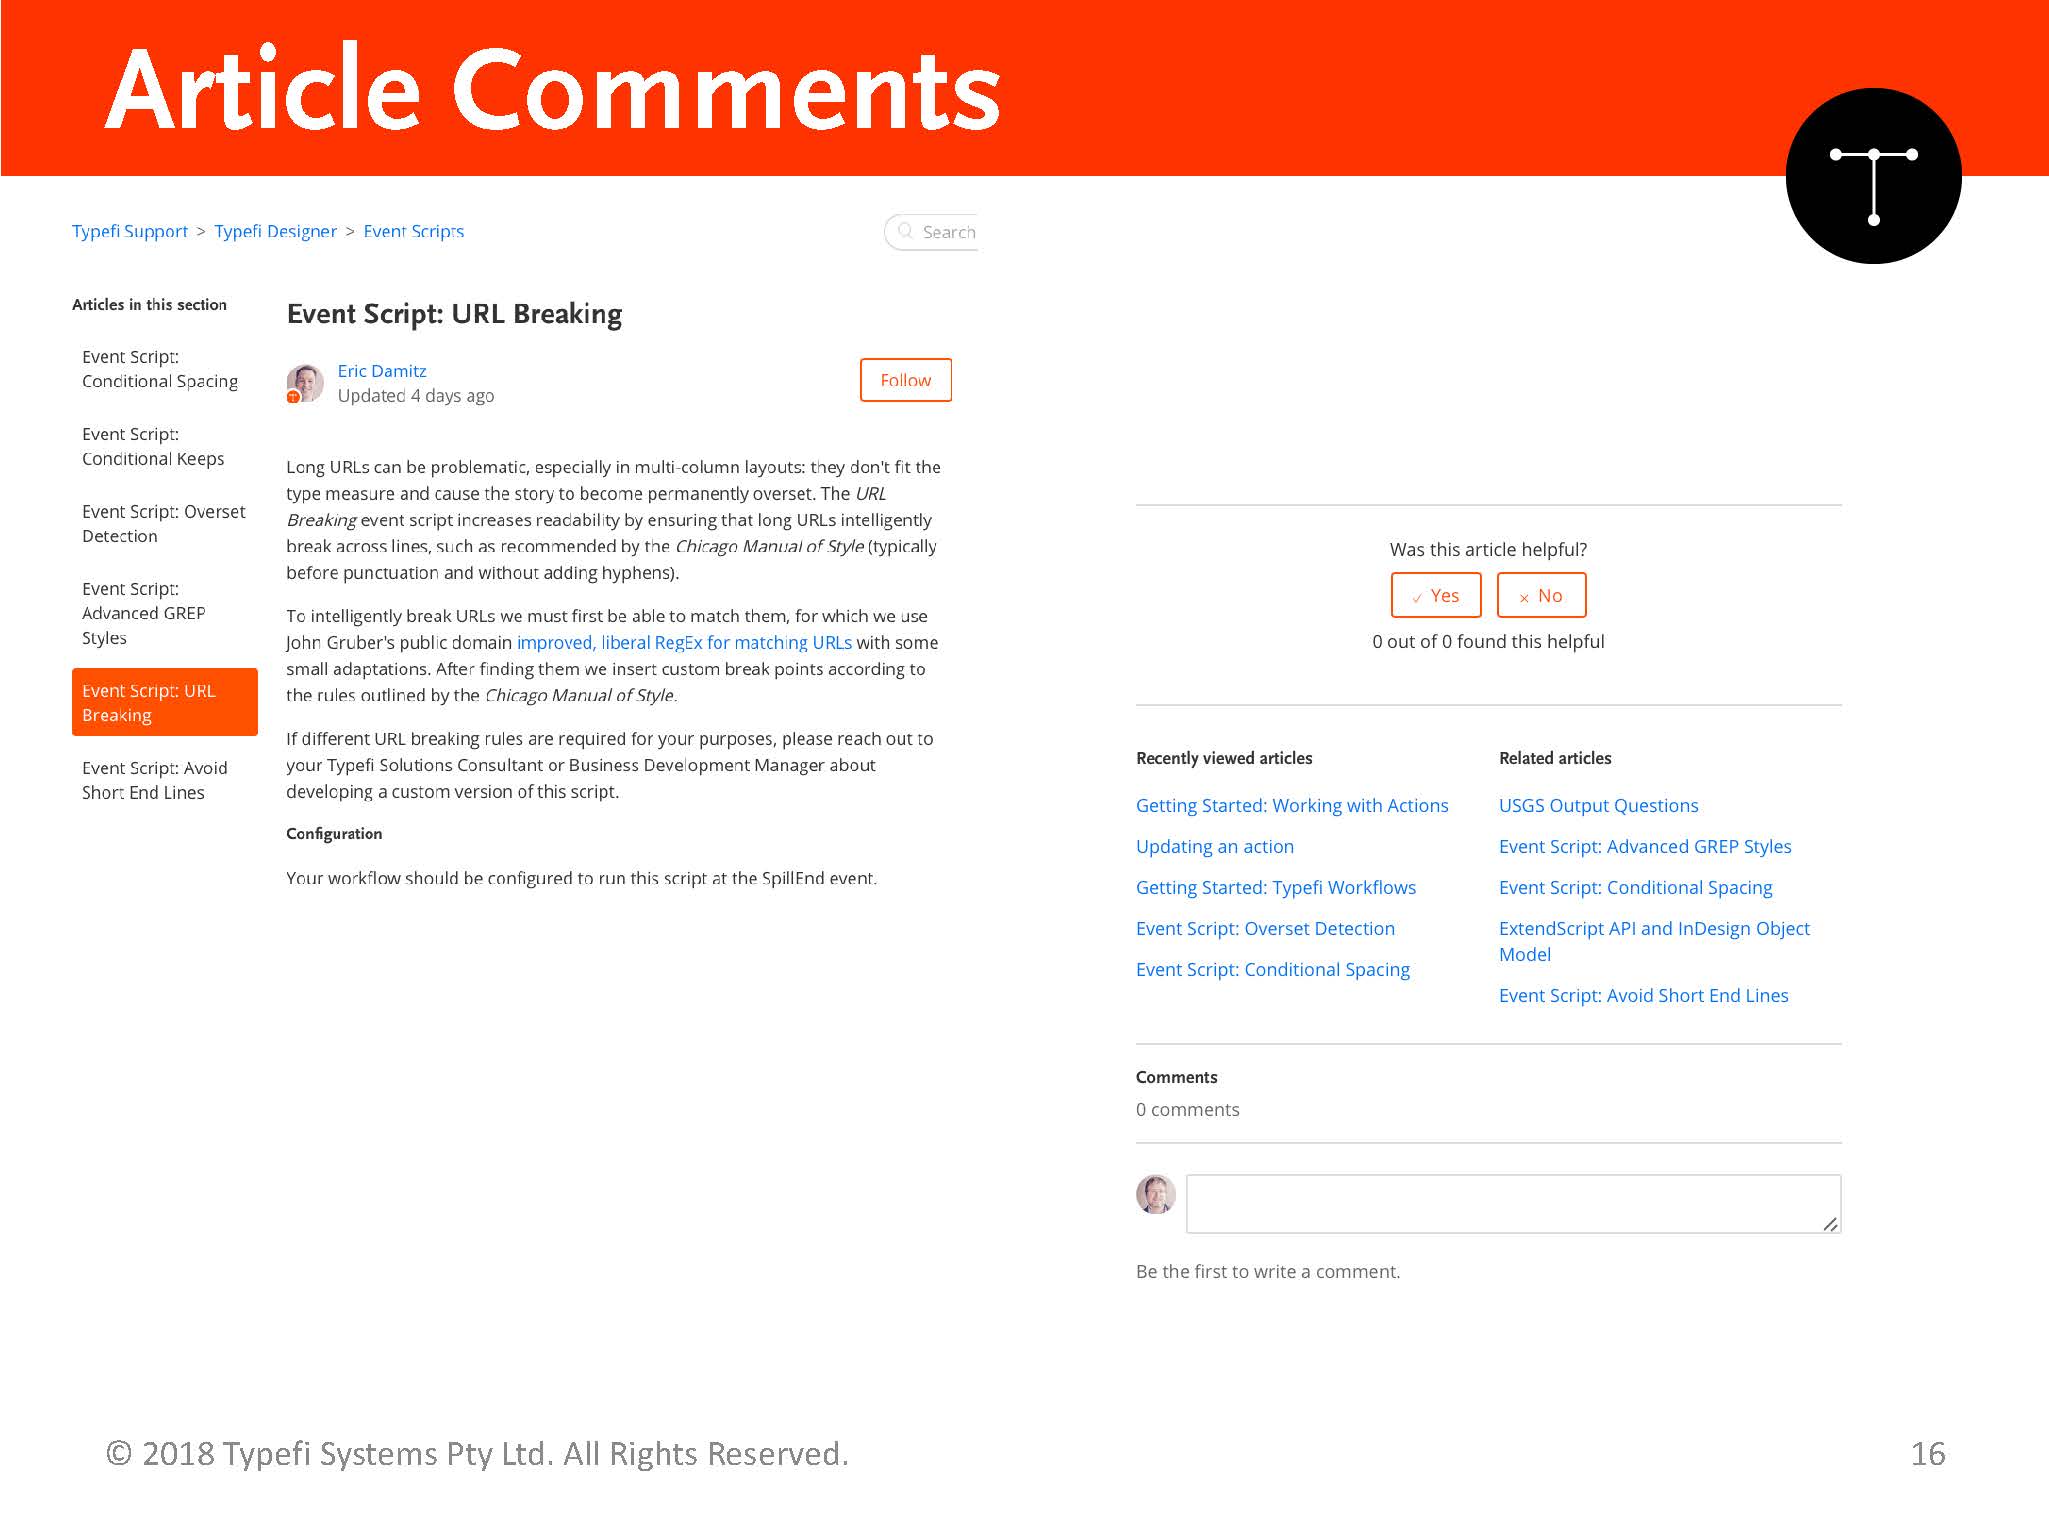 A screenshot of a typical article in Typefi Support. This one is 'Event Script: URL breaking' by Eric Damitz. At the bottom of the article there are options for the user to make a comment or mark whether or not the article was helpful, as well as lists of recently viewed articles and related articles.